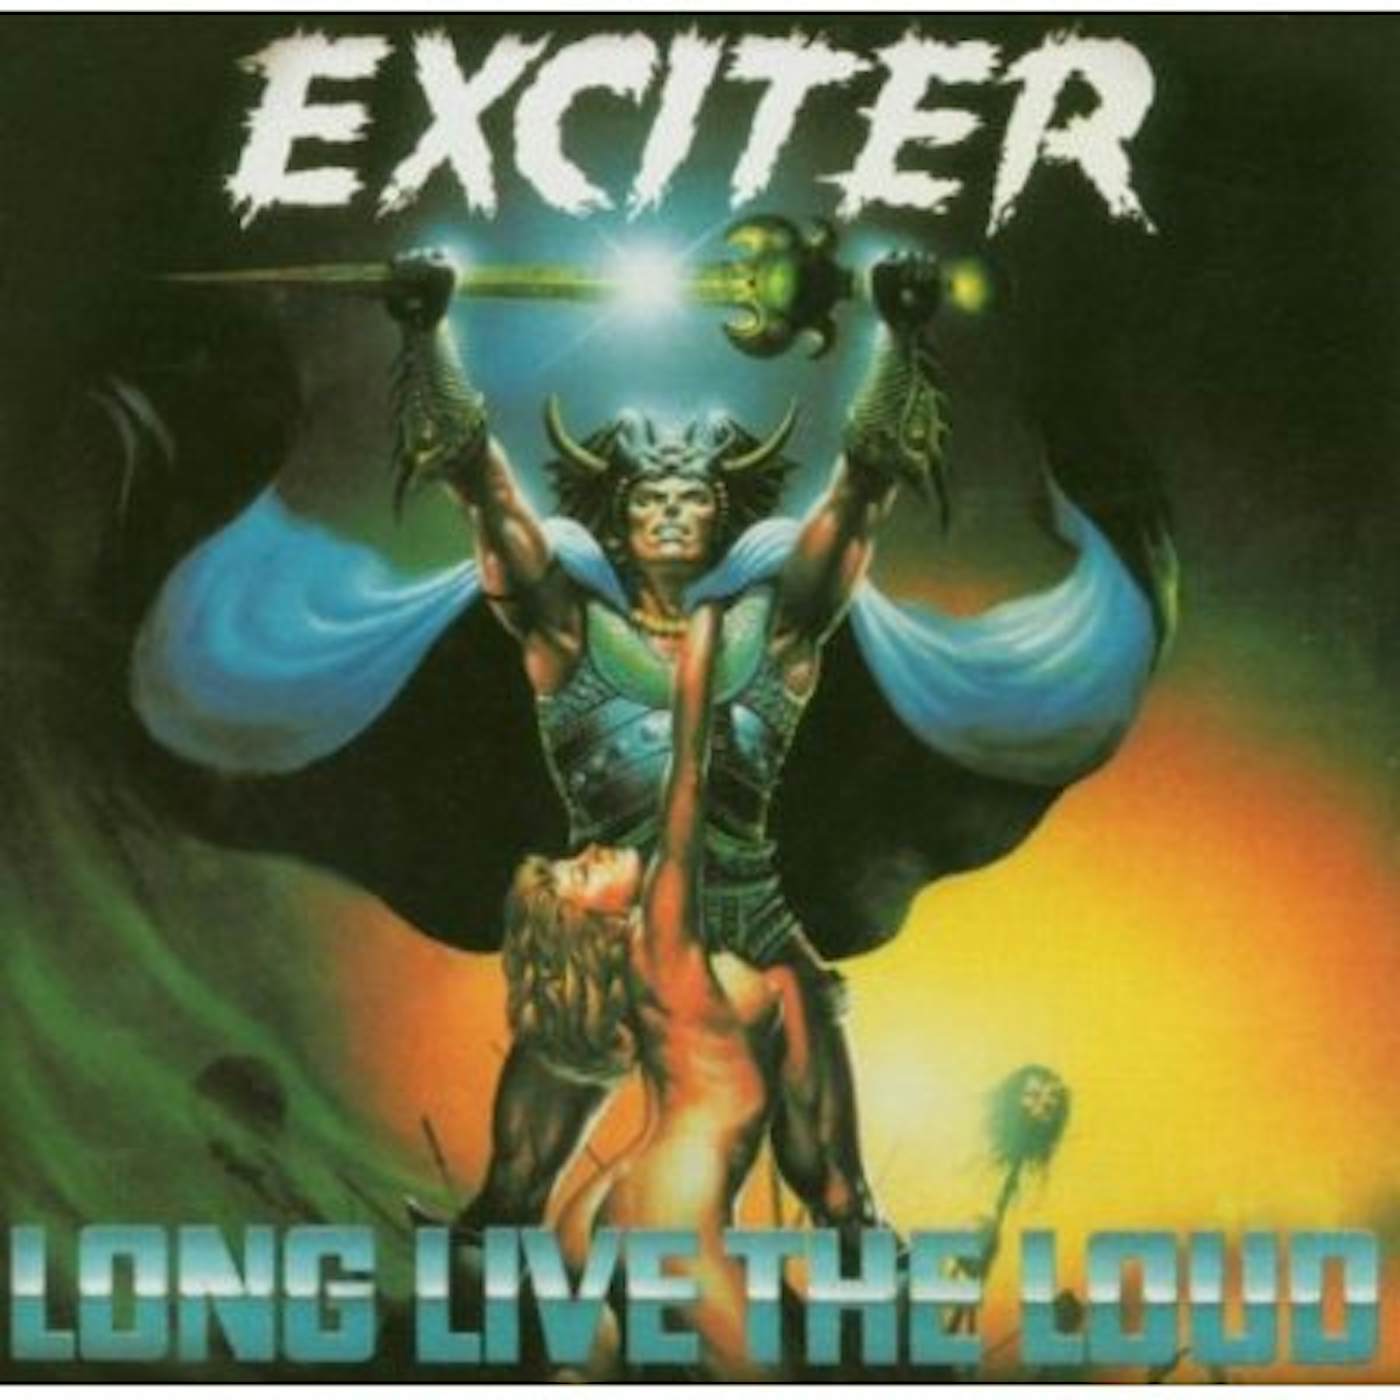 Exciter LONG LIVE THE LOUD CD